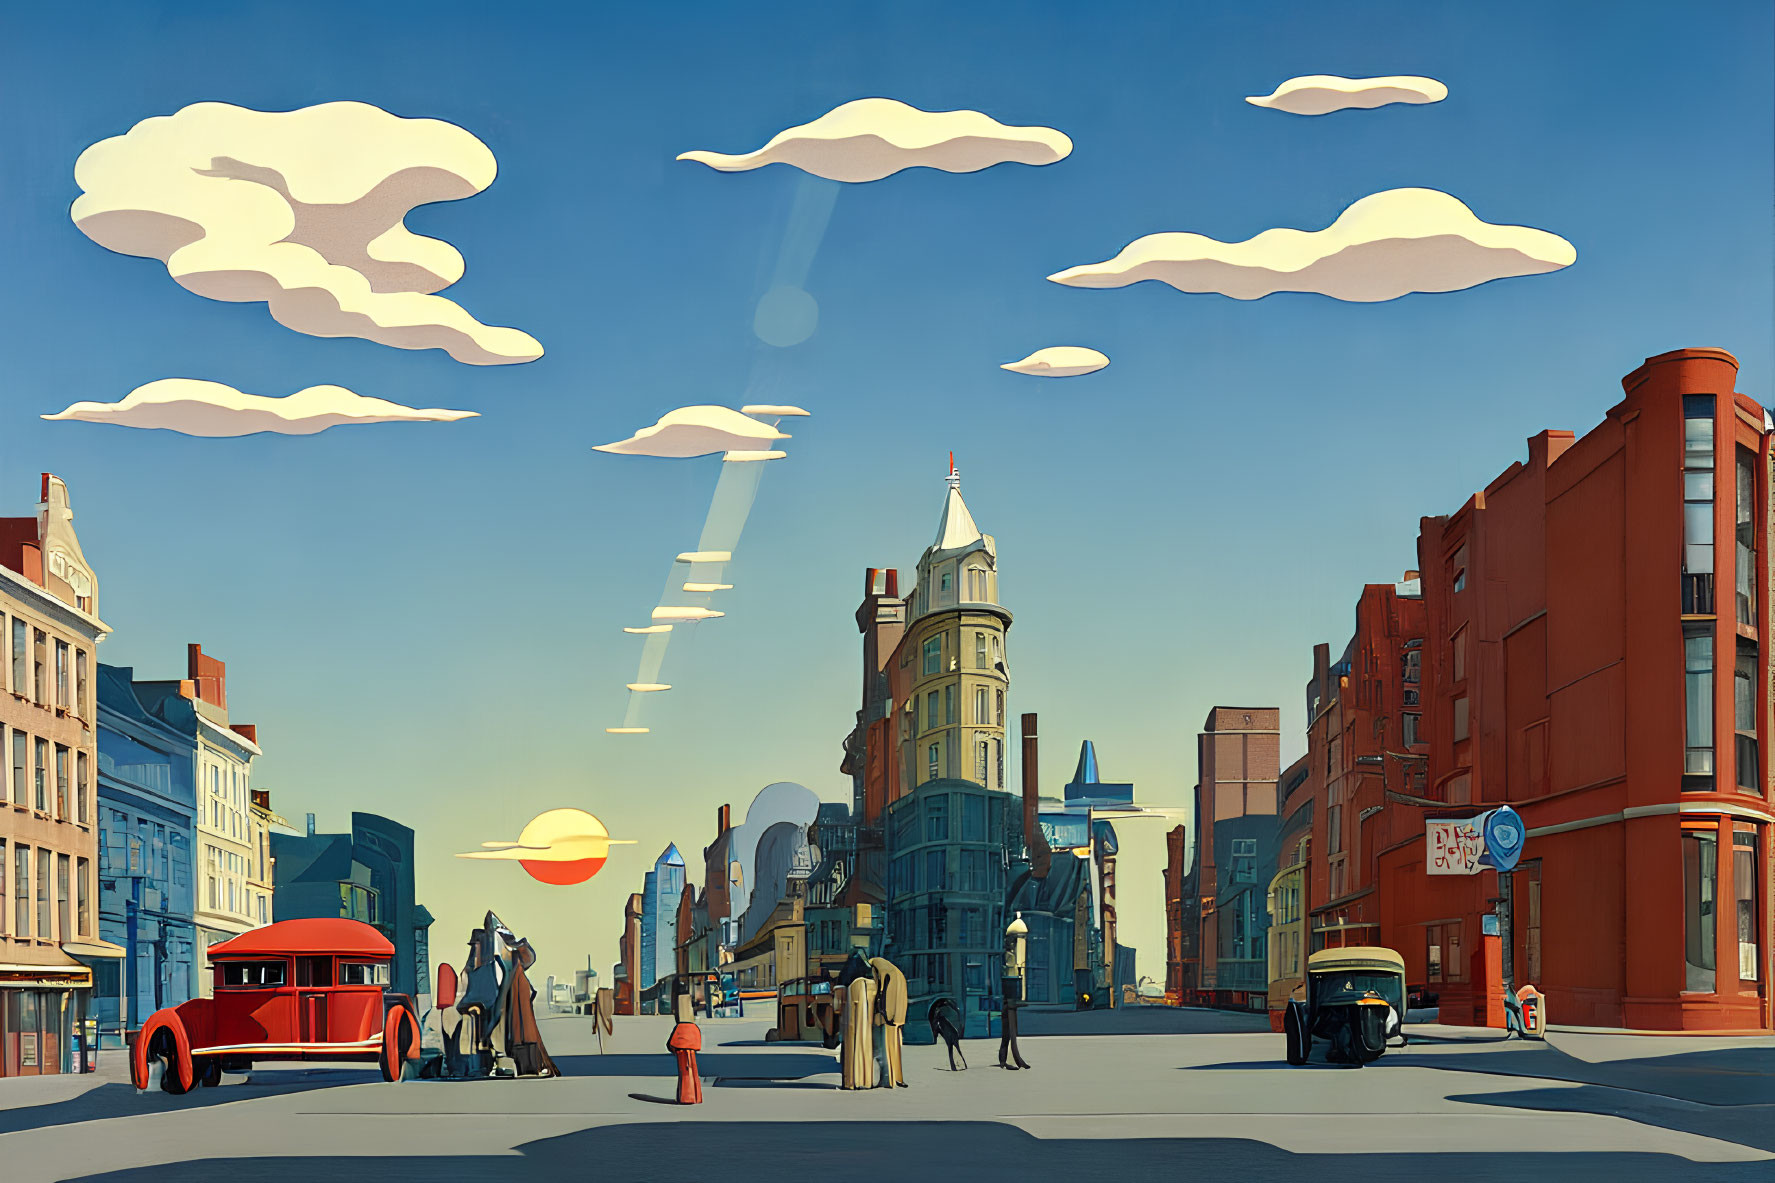 Cityscape with vintage cars, pedestrians, and buildings under clear sky and whimsical clouds.